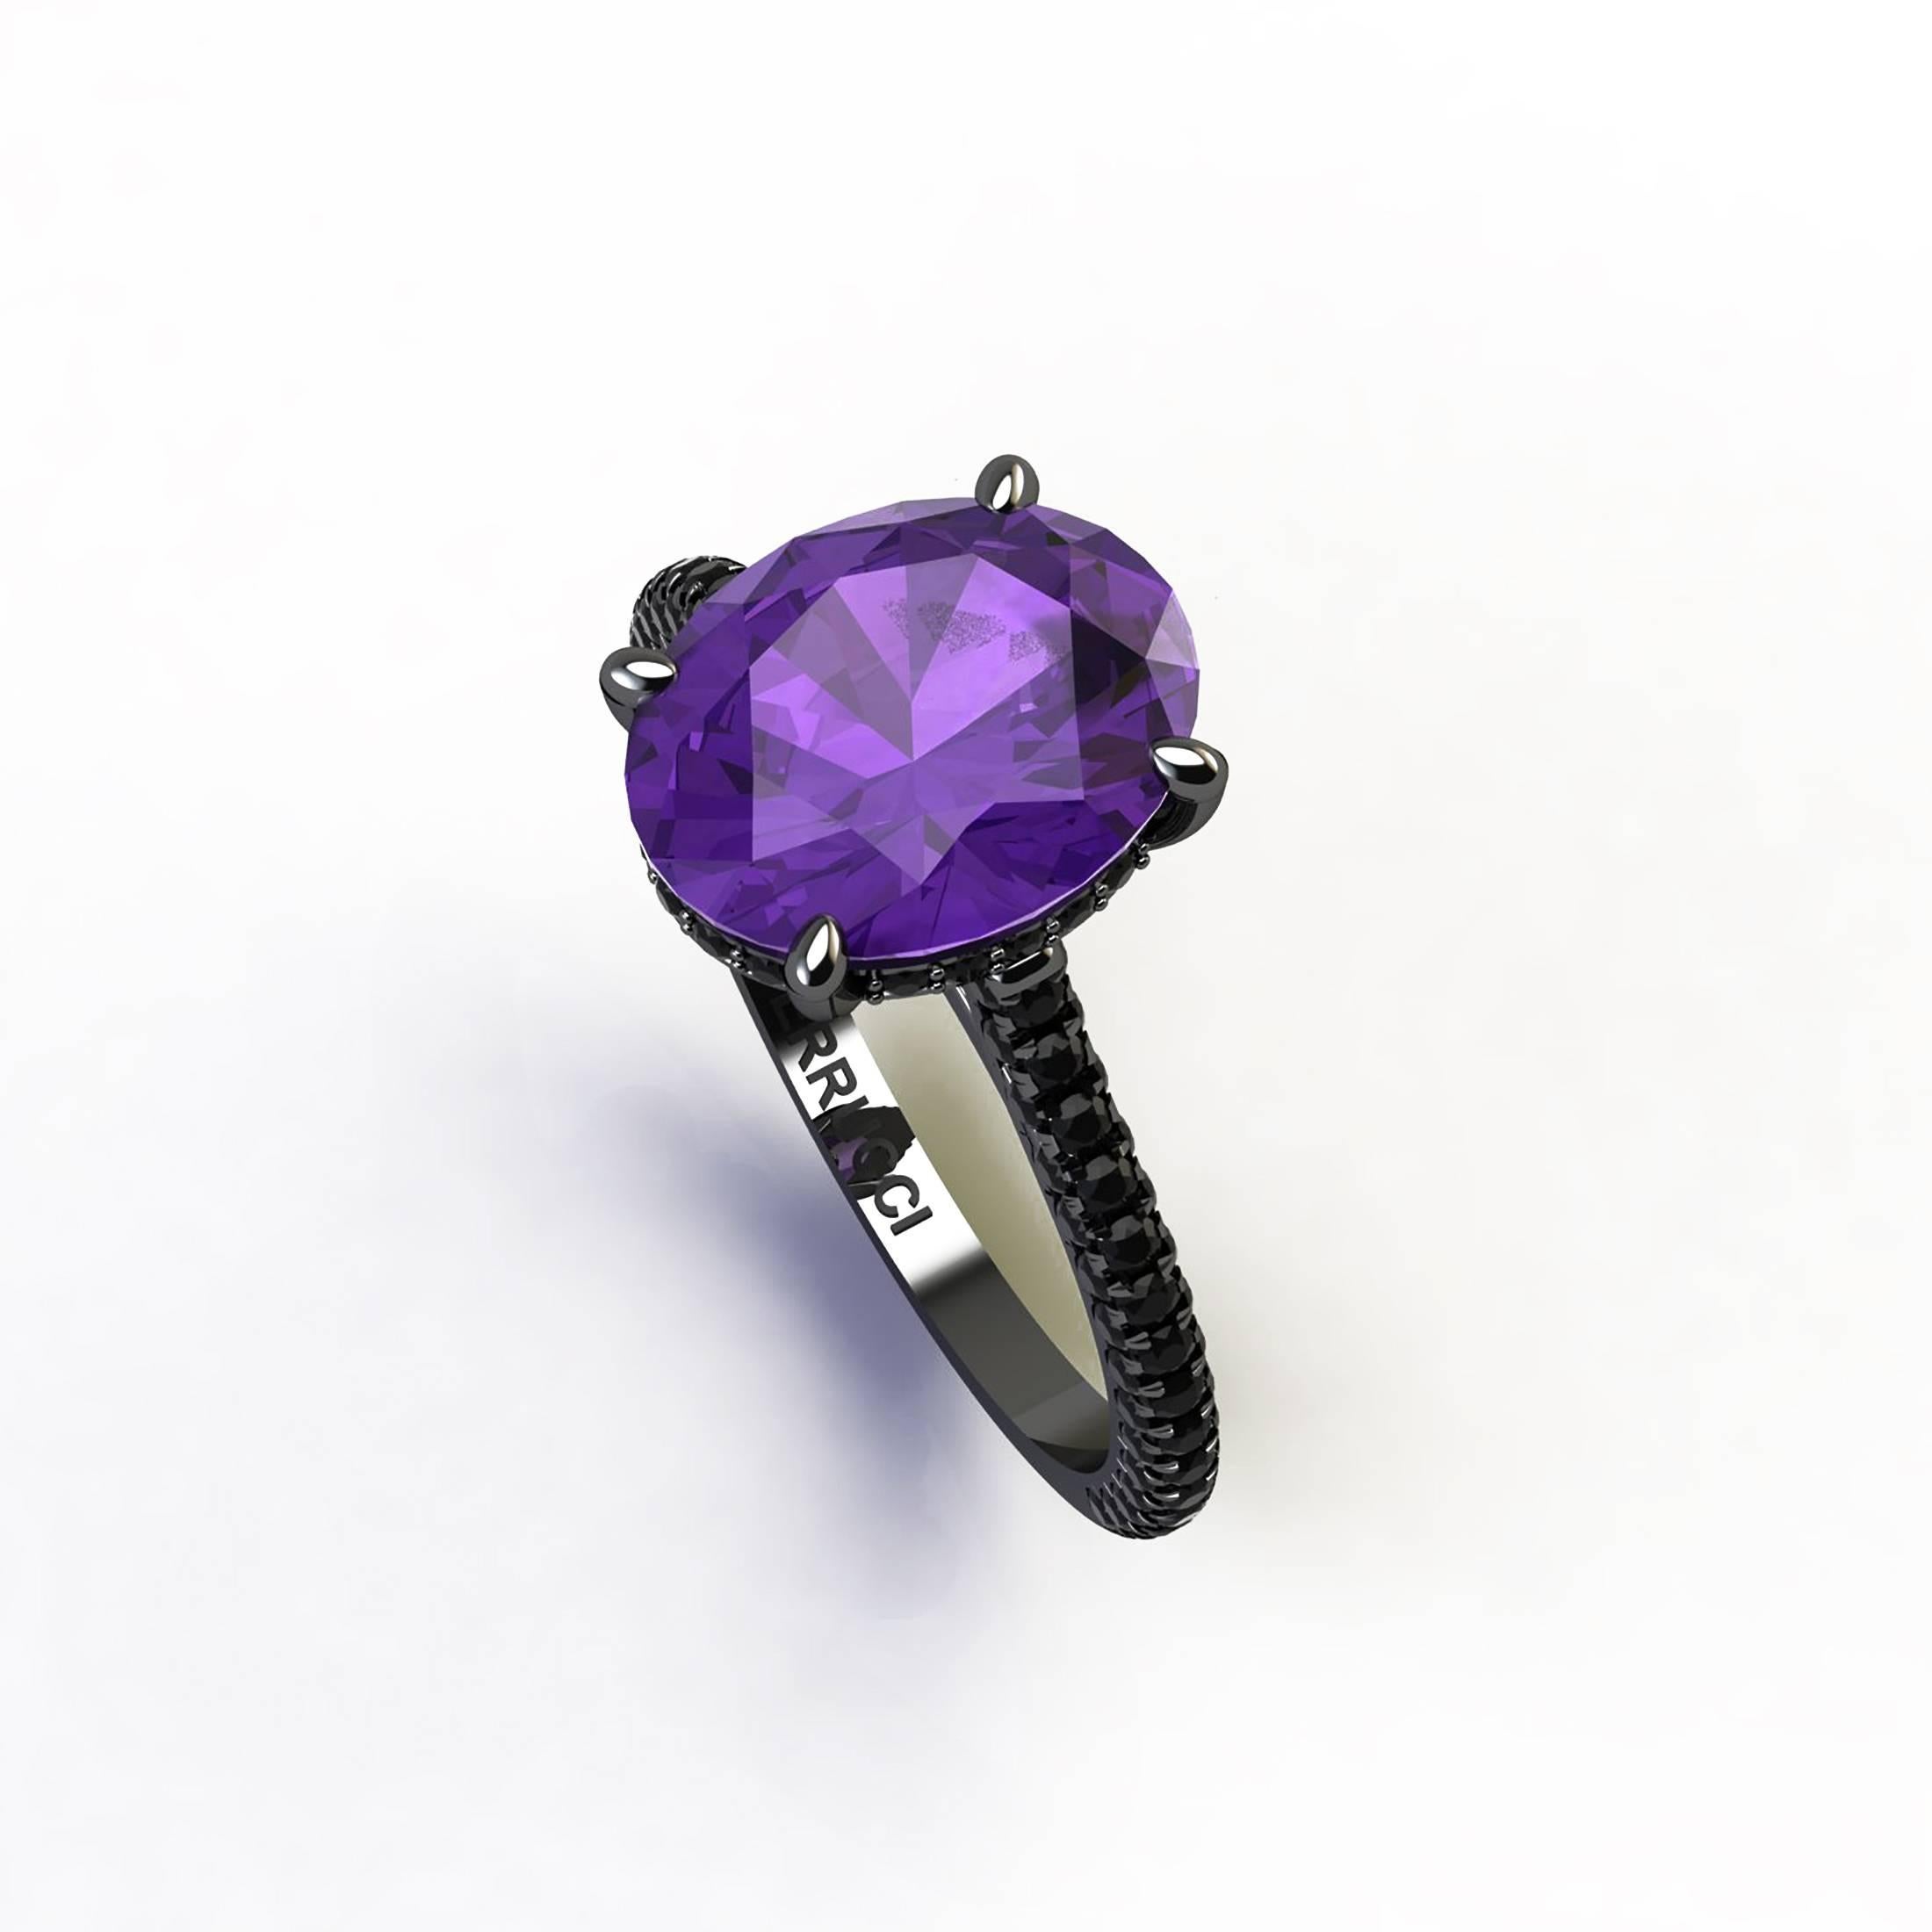 Natural Purple Oval Amethyst, hand cut in Oval cut shape, clean and pure gem, conveiced in an hand made 18k gold Black Rhodium cocktail ring,
adorned with a shower of Black Diamonds, hand set, on almost every surface of the ring, to give the maximum